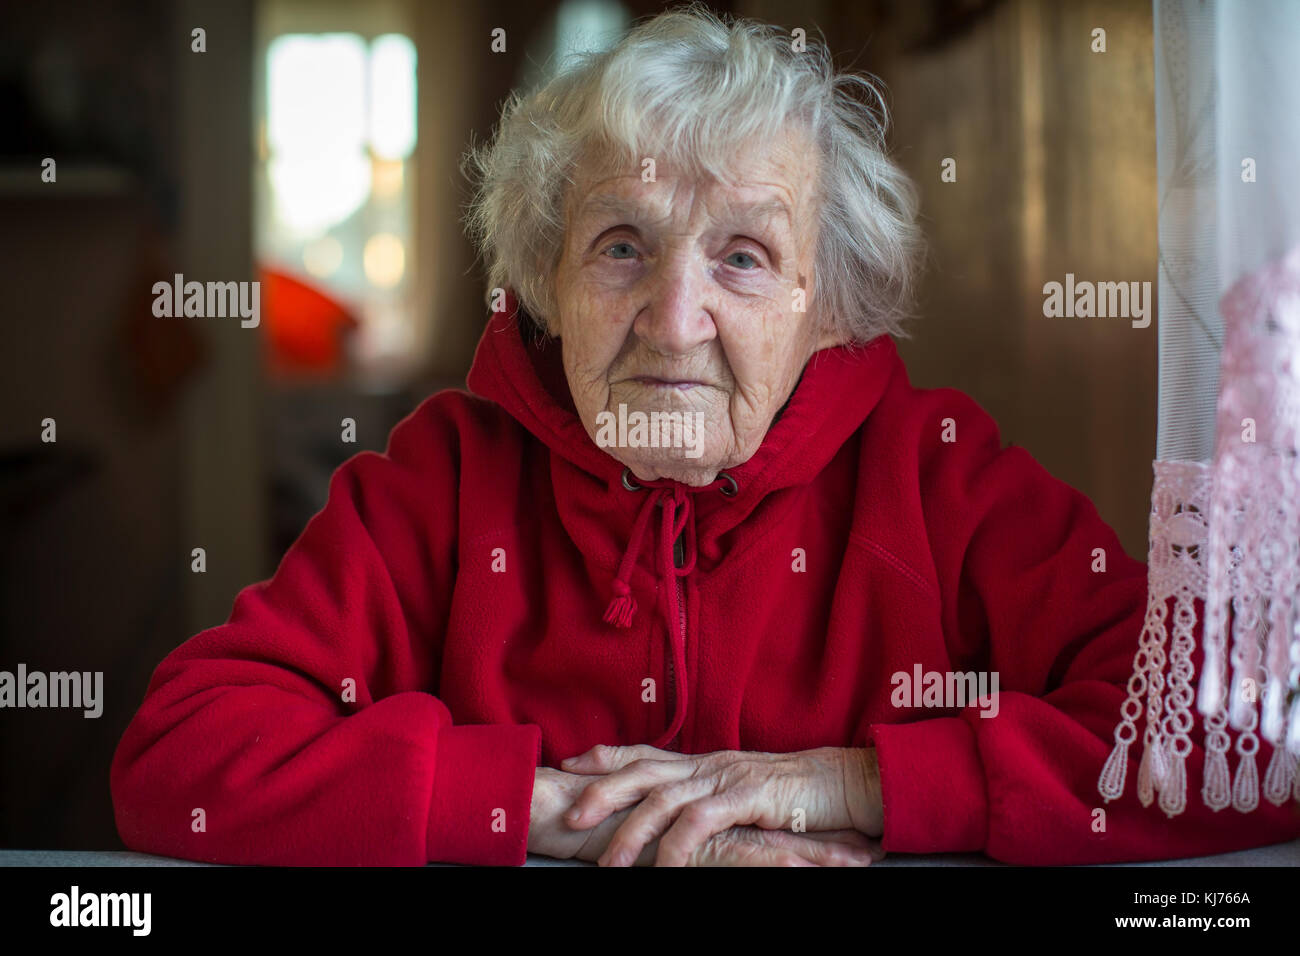 Elderly woman portrait in a bright red jacket. Stock Photo